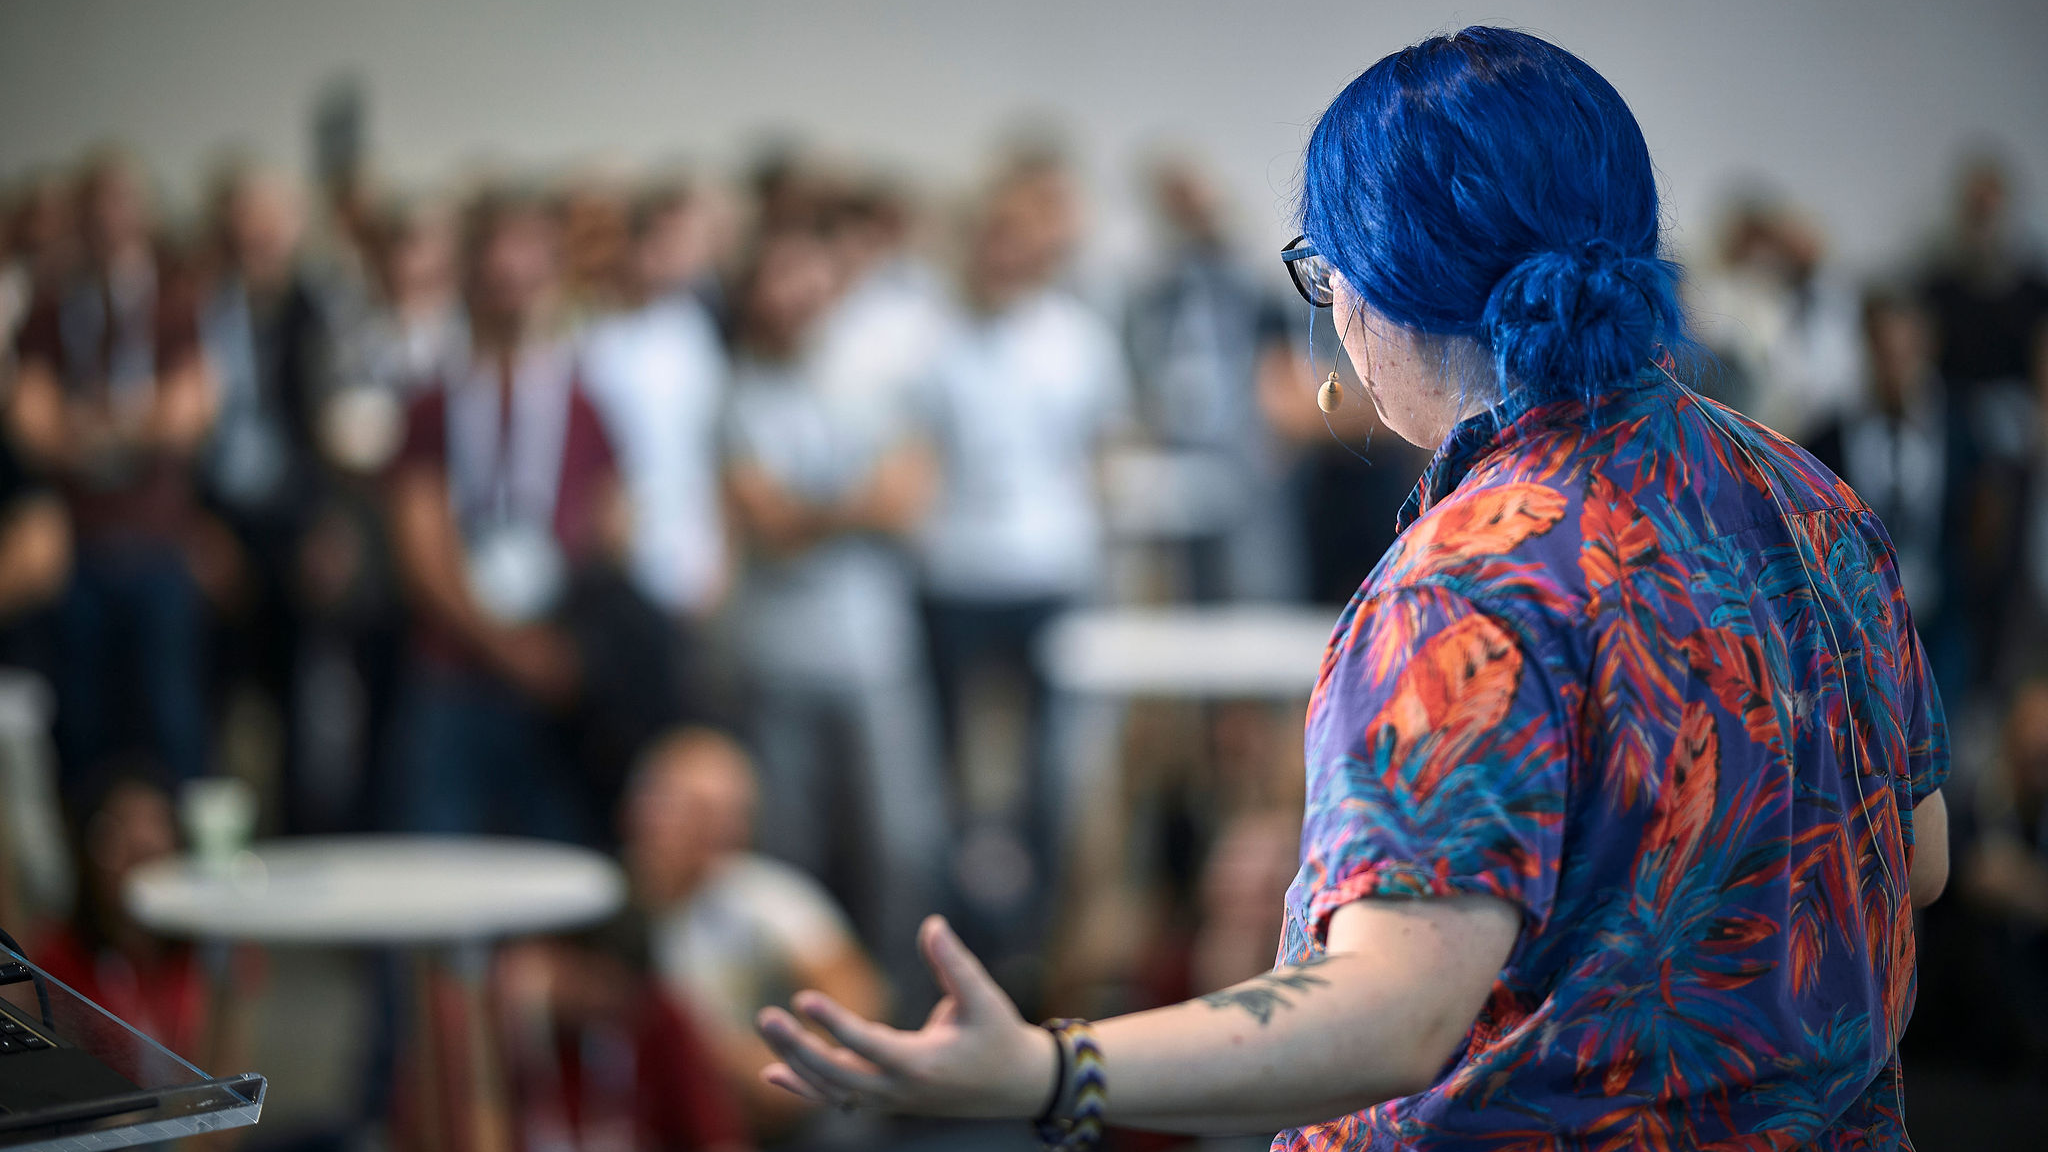 A photo, shot from behind, of a person with blue hair and a colorful shirt presenting to an audience. The audience in the background is blurry.